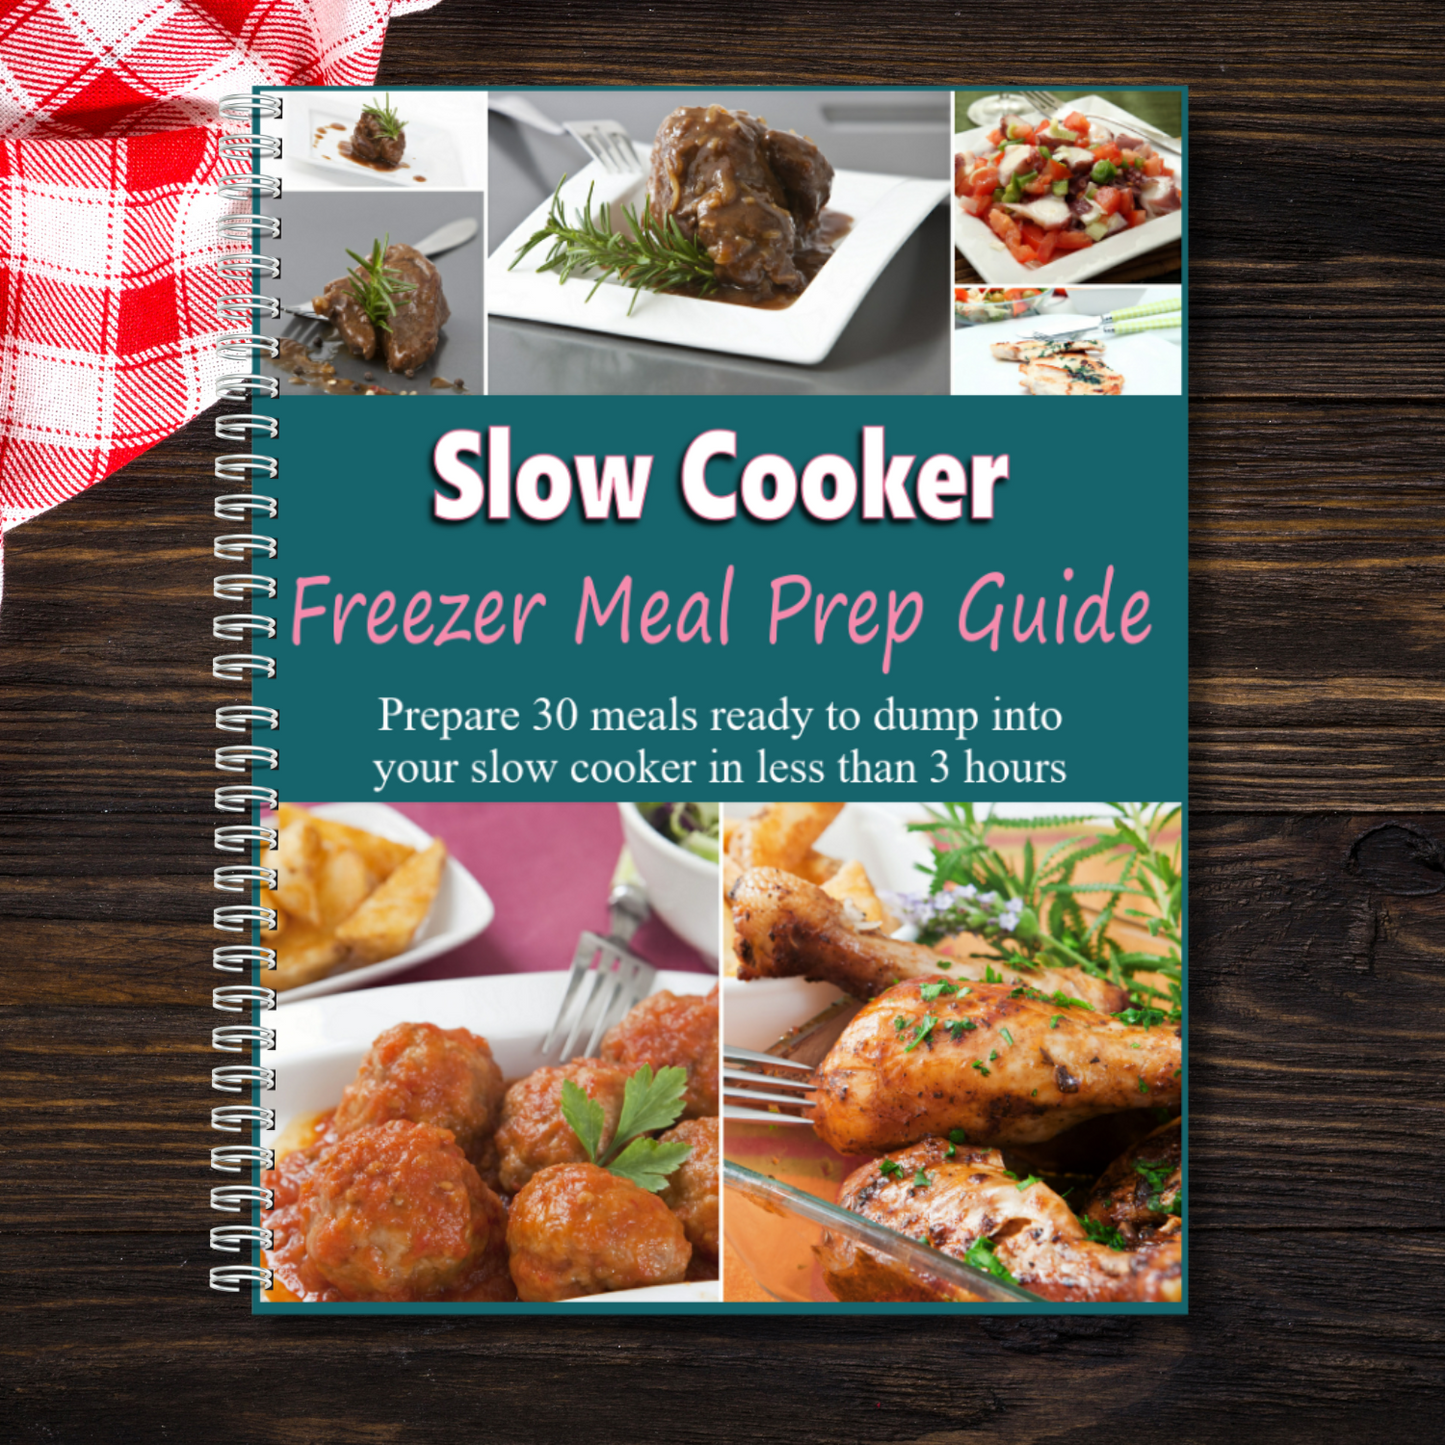 Slow Cooker Freezer Meal Plan Guide